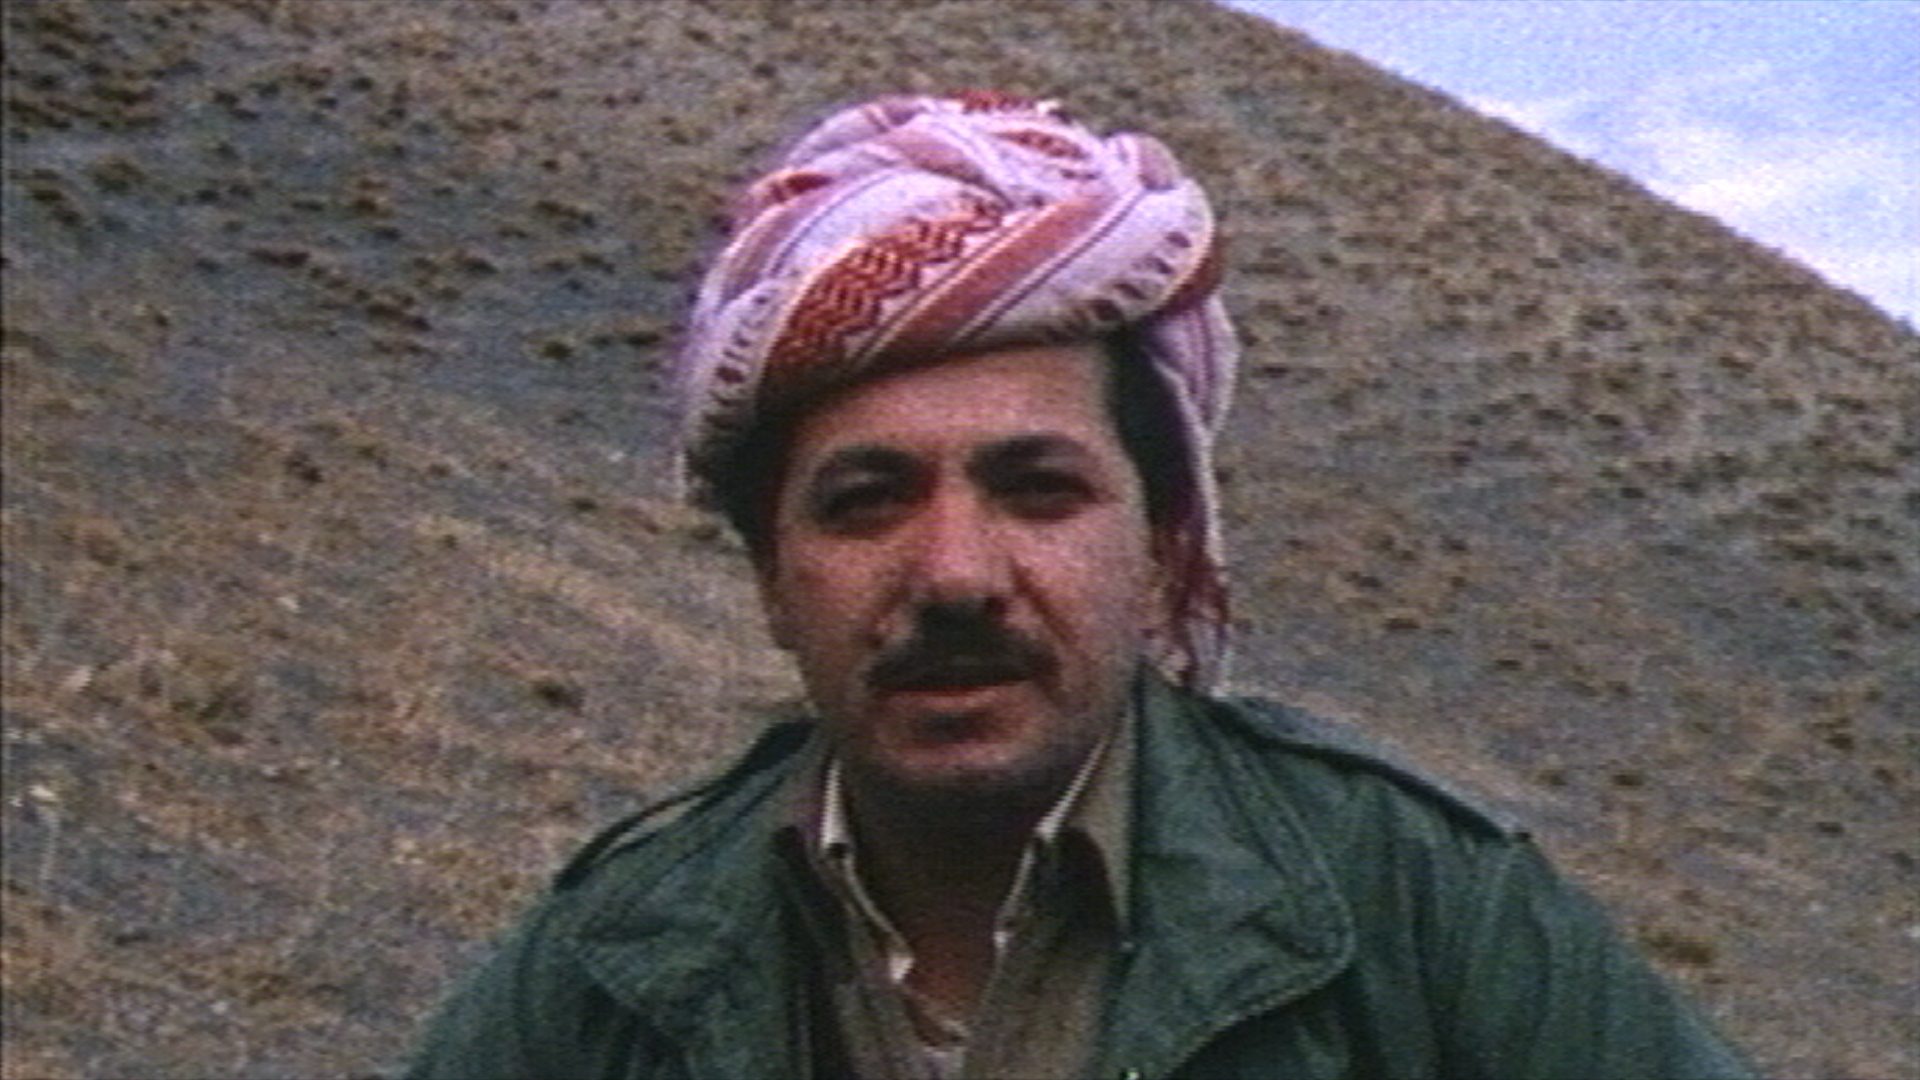 In 1985 a British journalist working for Independent Television News (ITN) reported the disappearance of 8,000 Barzanis from within northern Iraq. MASOUD BARZANI, their tribal leader, told him a large number had been executed and the rest taken to desert camps near Iraq's borders with Saudi Arabia and Jordan.